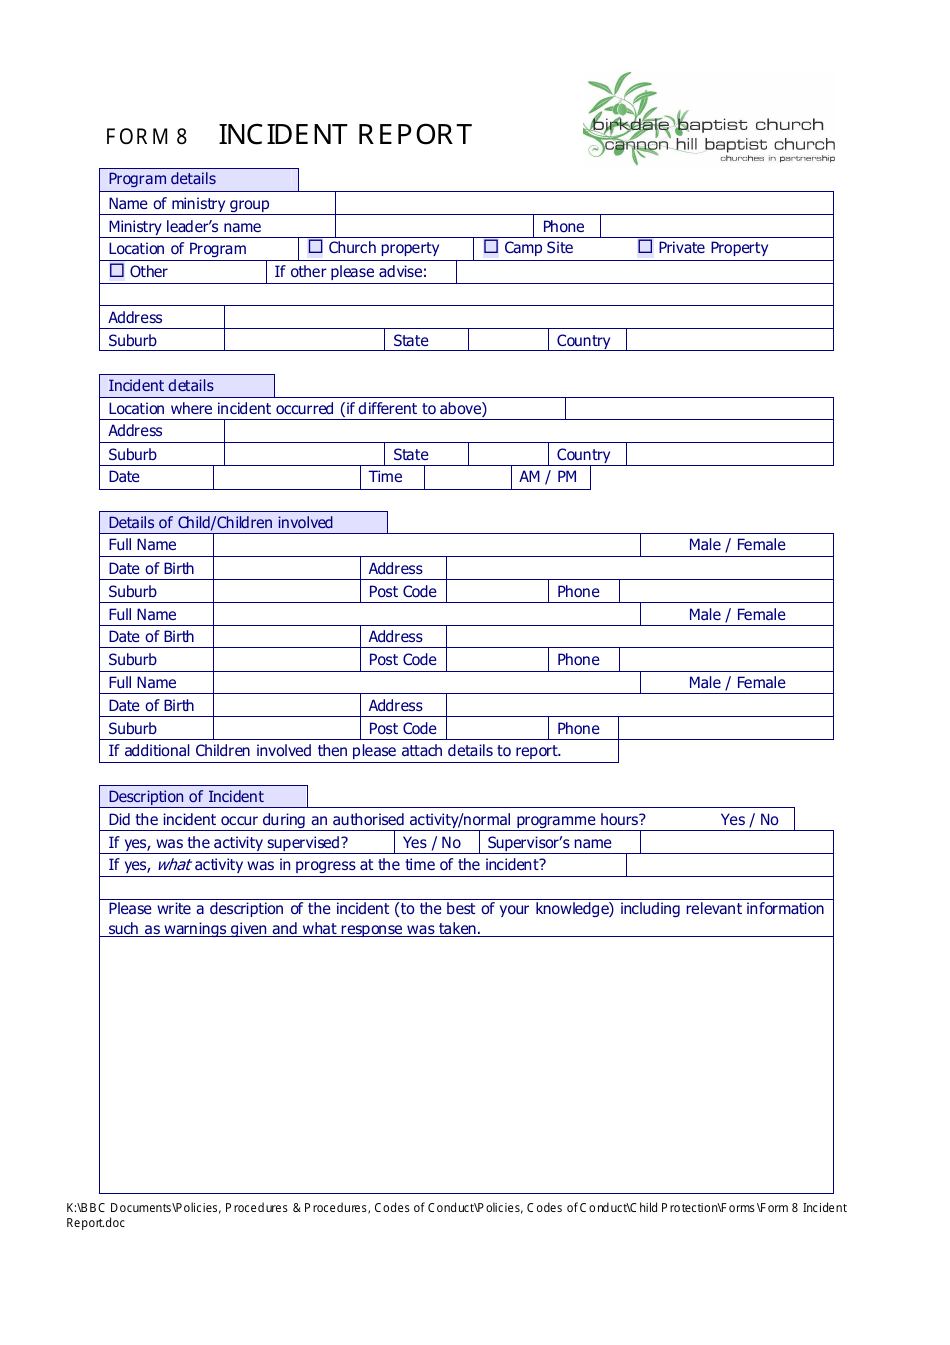 Incident Report Form - Birkdate Baptist Church, Cannon Hill Baptist Church, Page 1